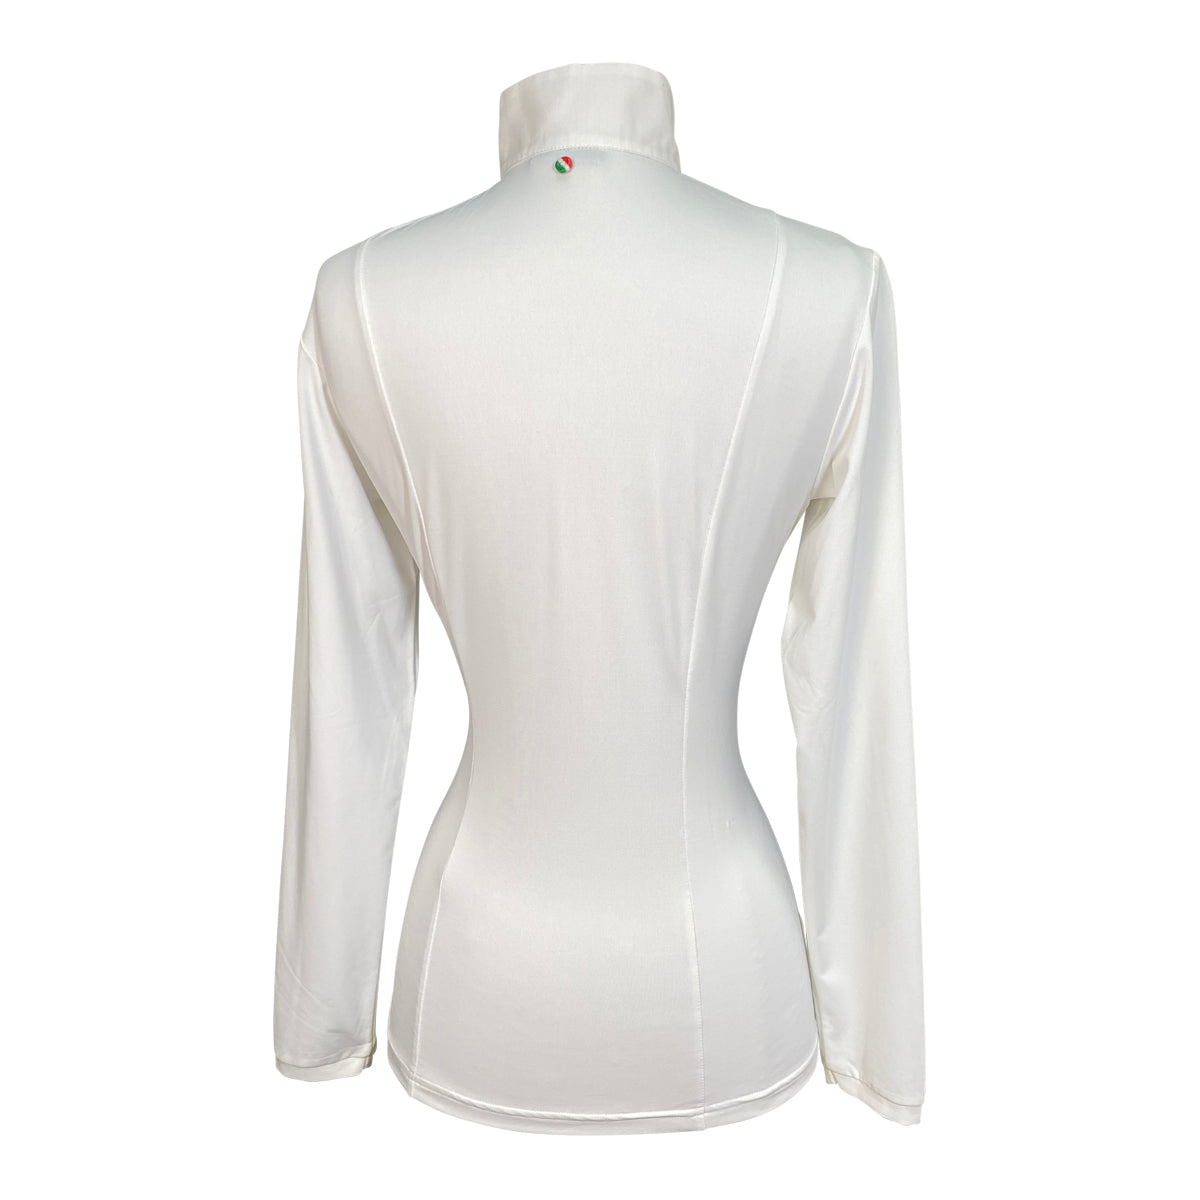 For Horses 'Sirio' Show Shirt in White